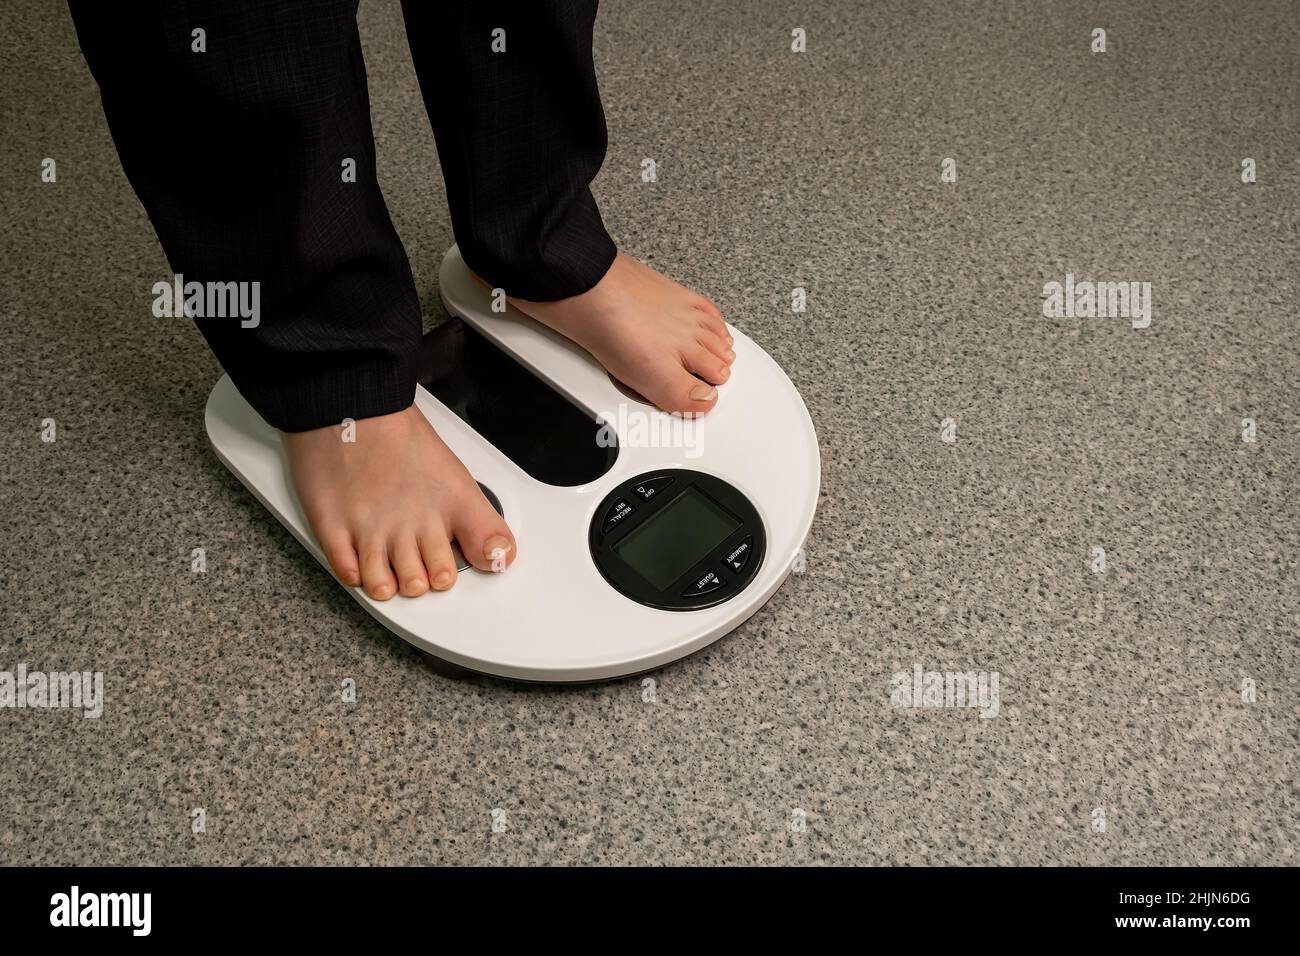 Health care, fitness and weight loss. Child on analytical balance. Stock Photo